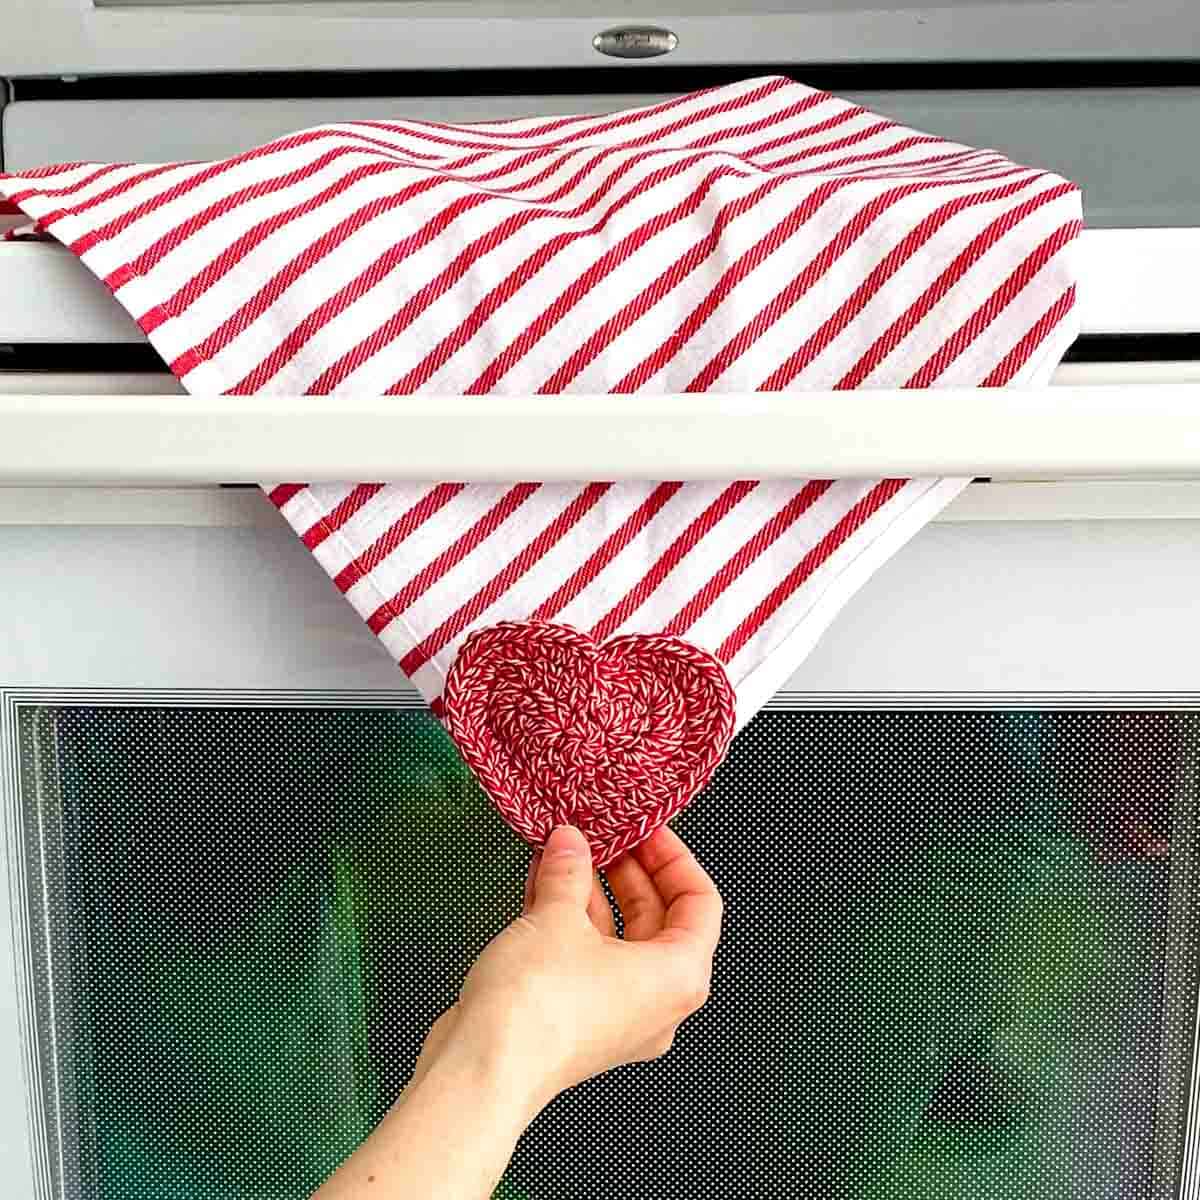 passing a dishtowel with a crochet towel topper through the bar of an oven